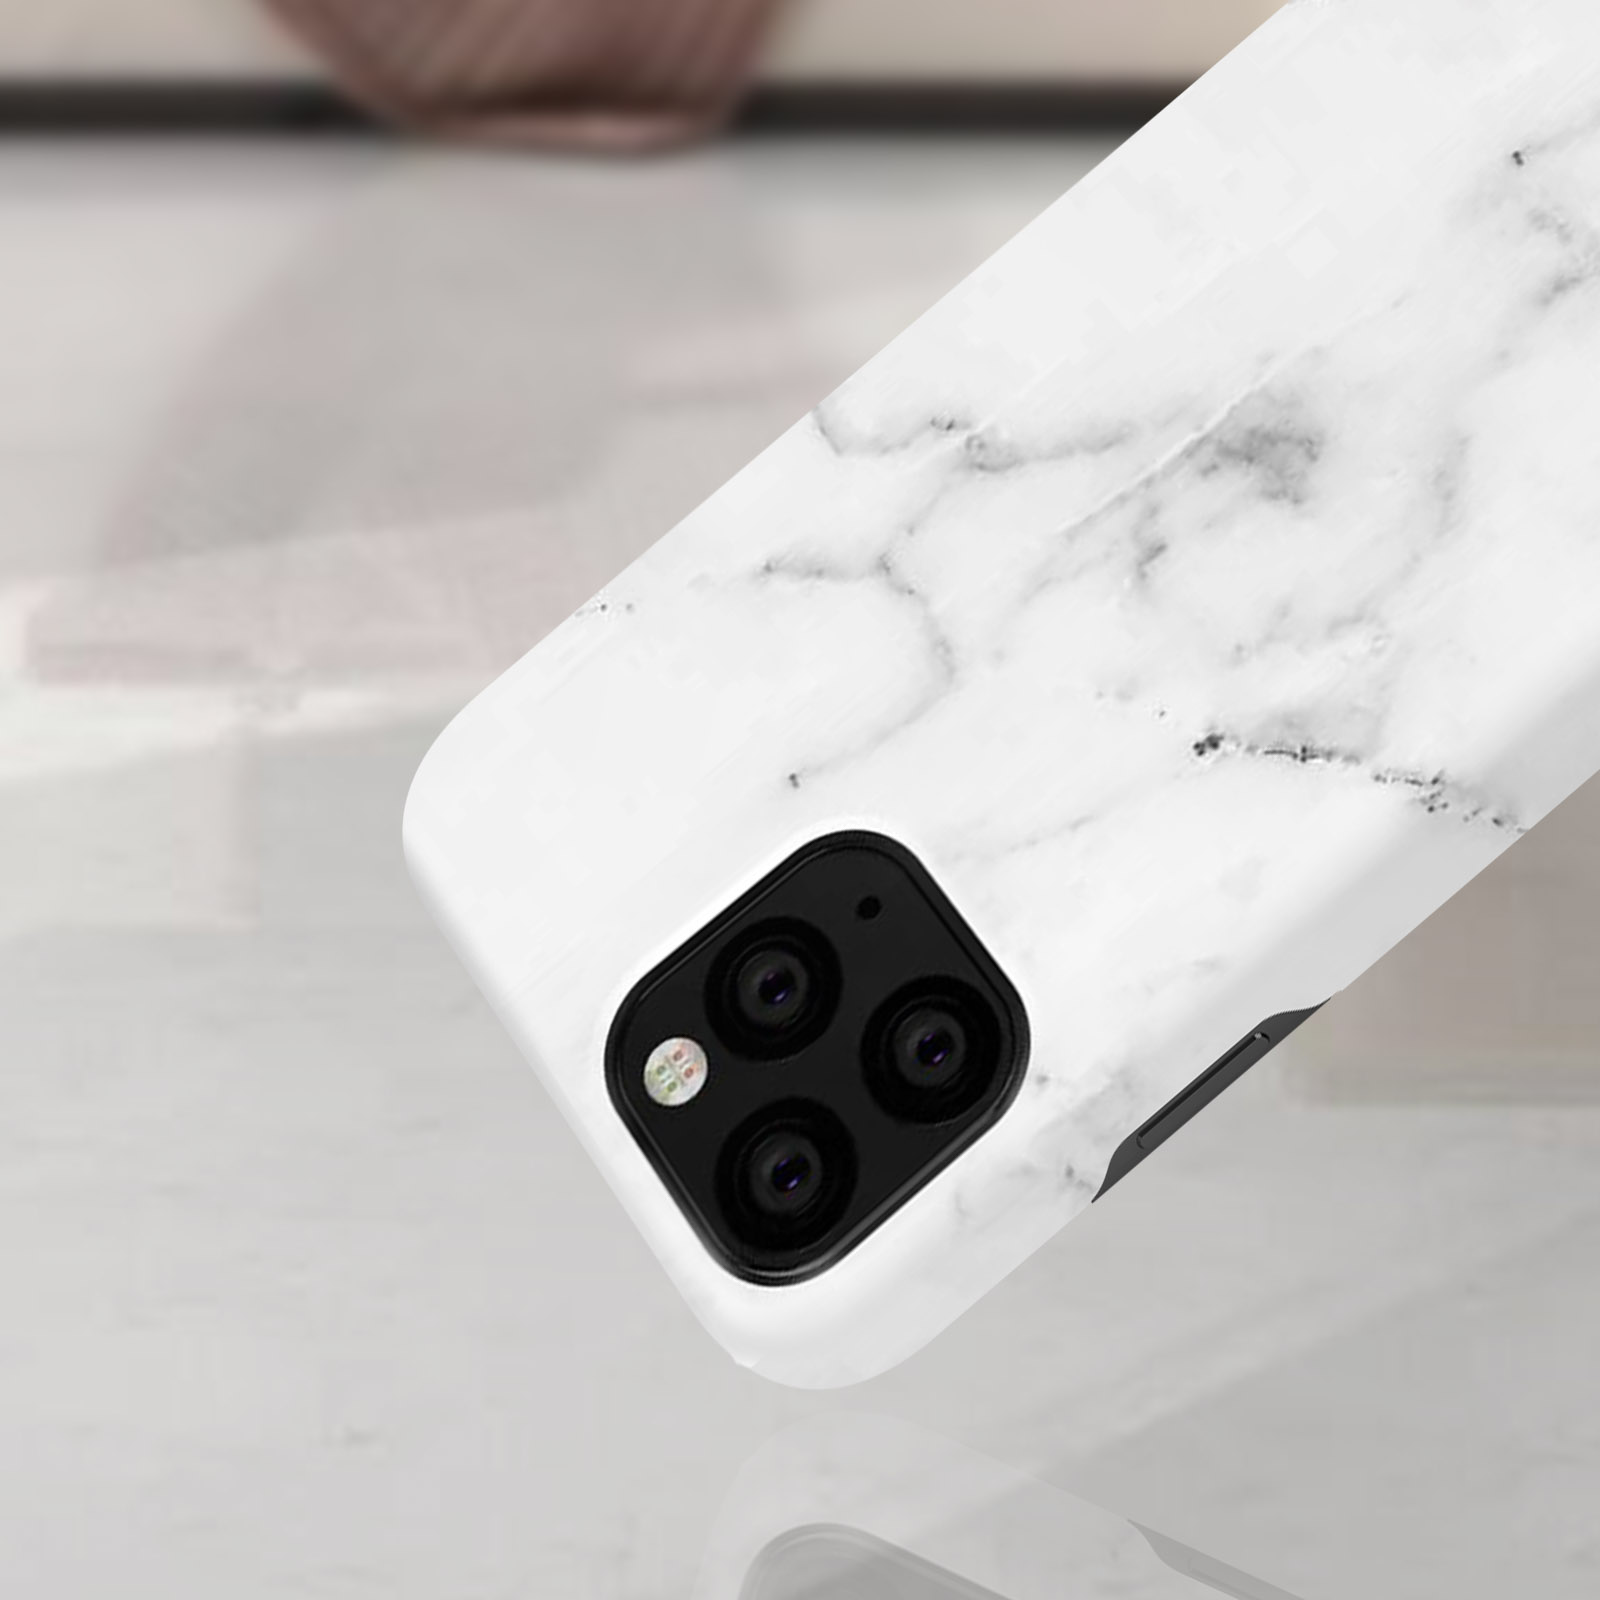 IDFC-I1965-22, Backcover, Apple, Max, Max, XS Pro 11 iPhone White IDEAL SWEDEN iPhone OF Apple Apple Marble